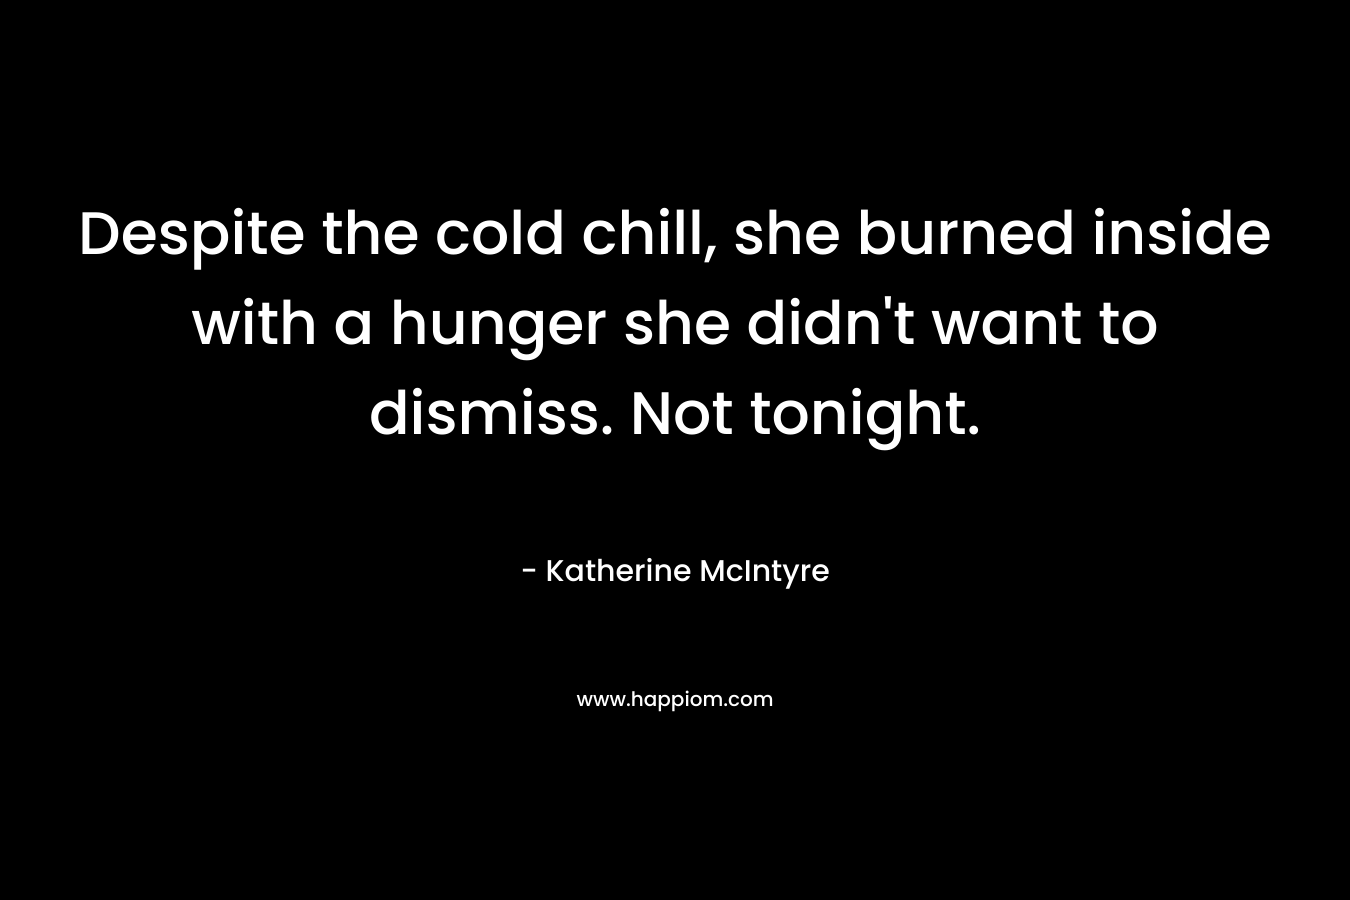 Despite the cold chill, she burned inside with a hunger she didn’t want to dismiss. Not tonight. – Katherine McIntyre